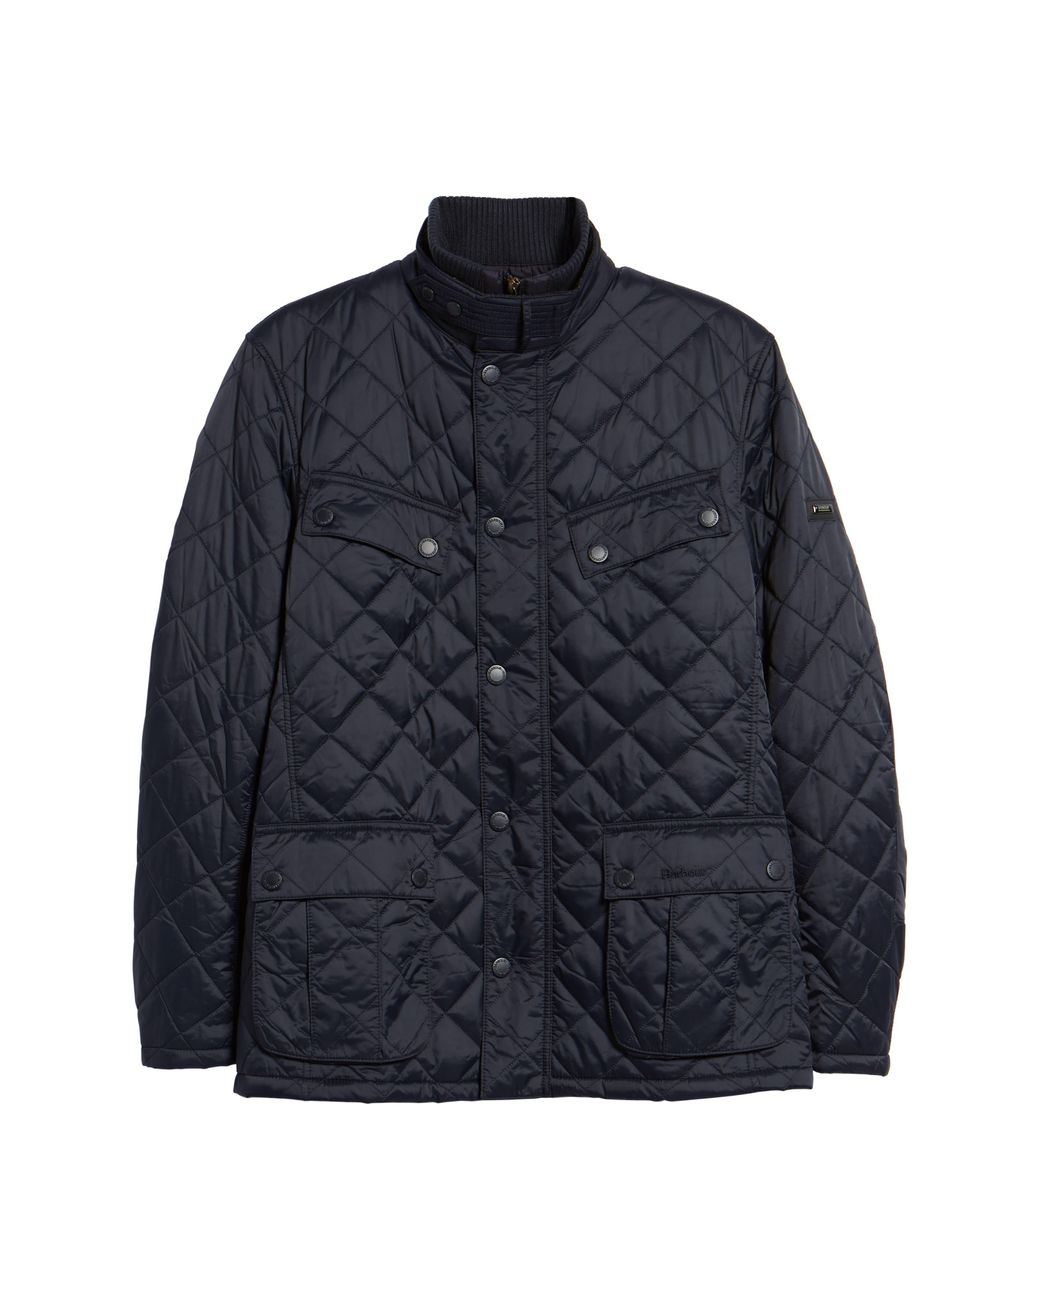 Barbour International Windshield Quilted Jacket In Navy At Nordstrom ...